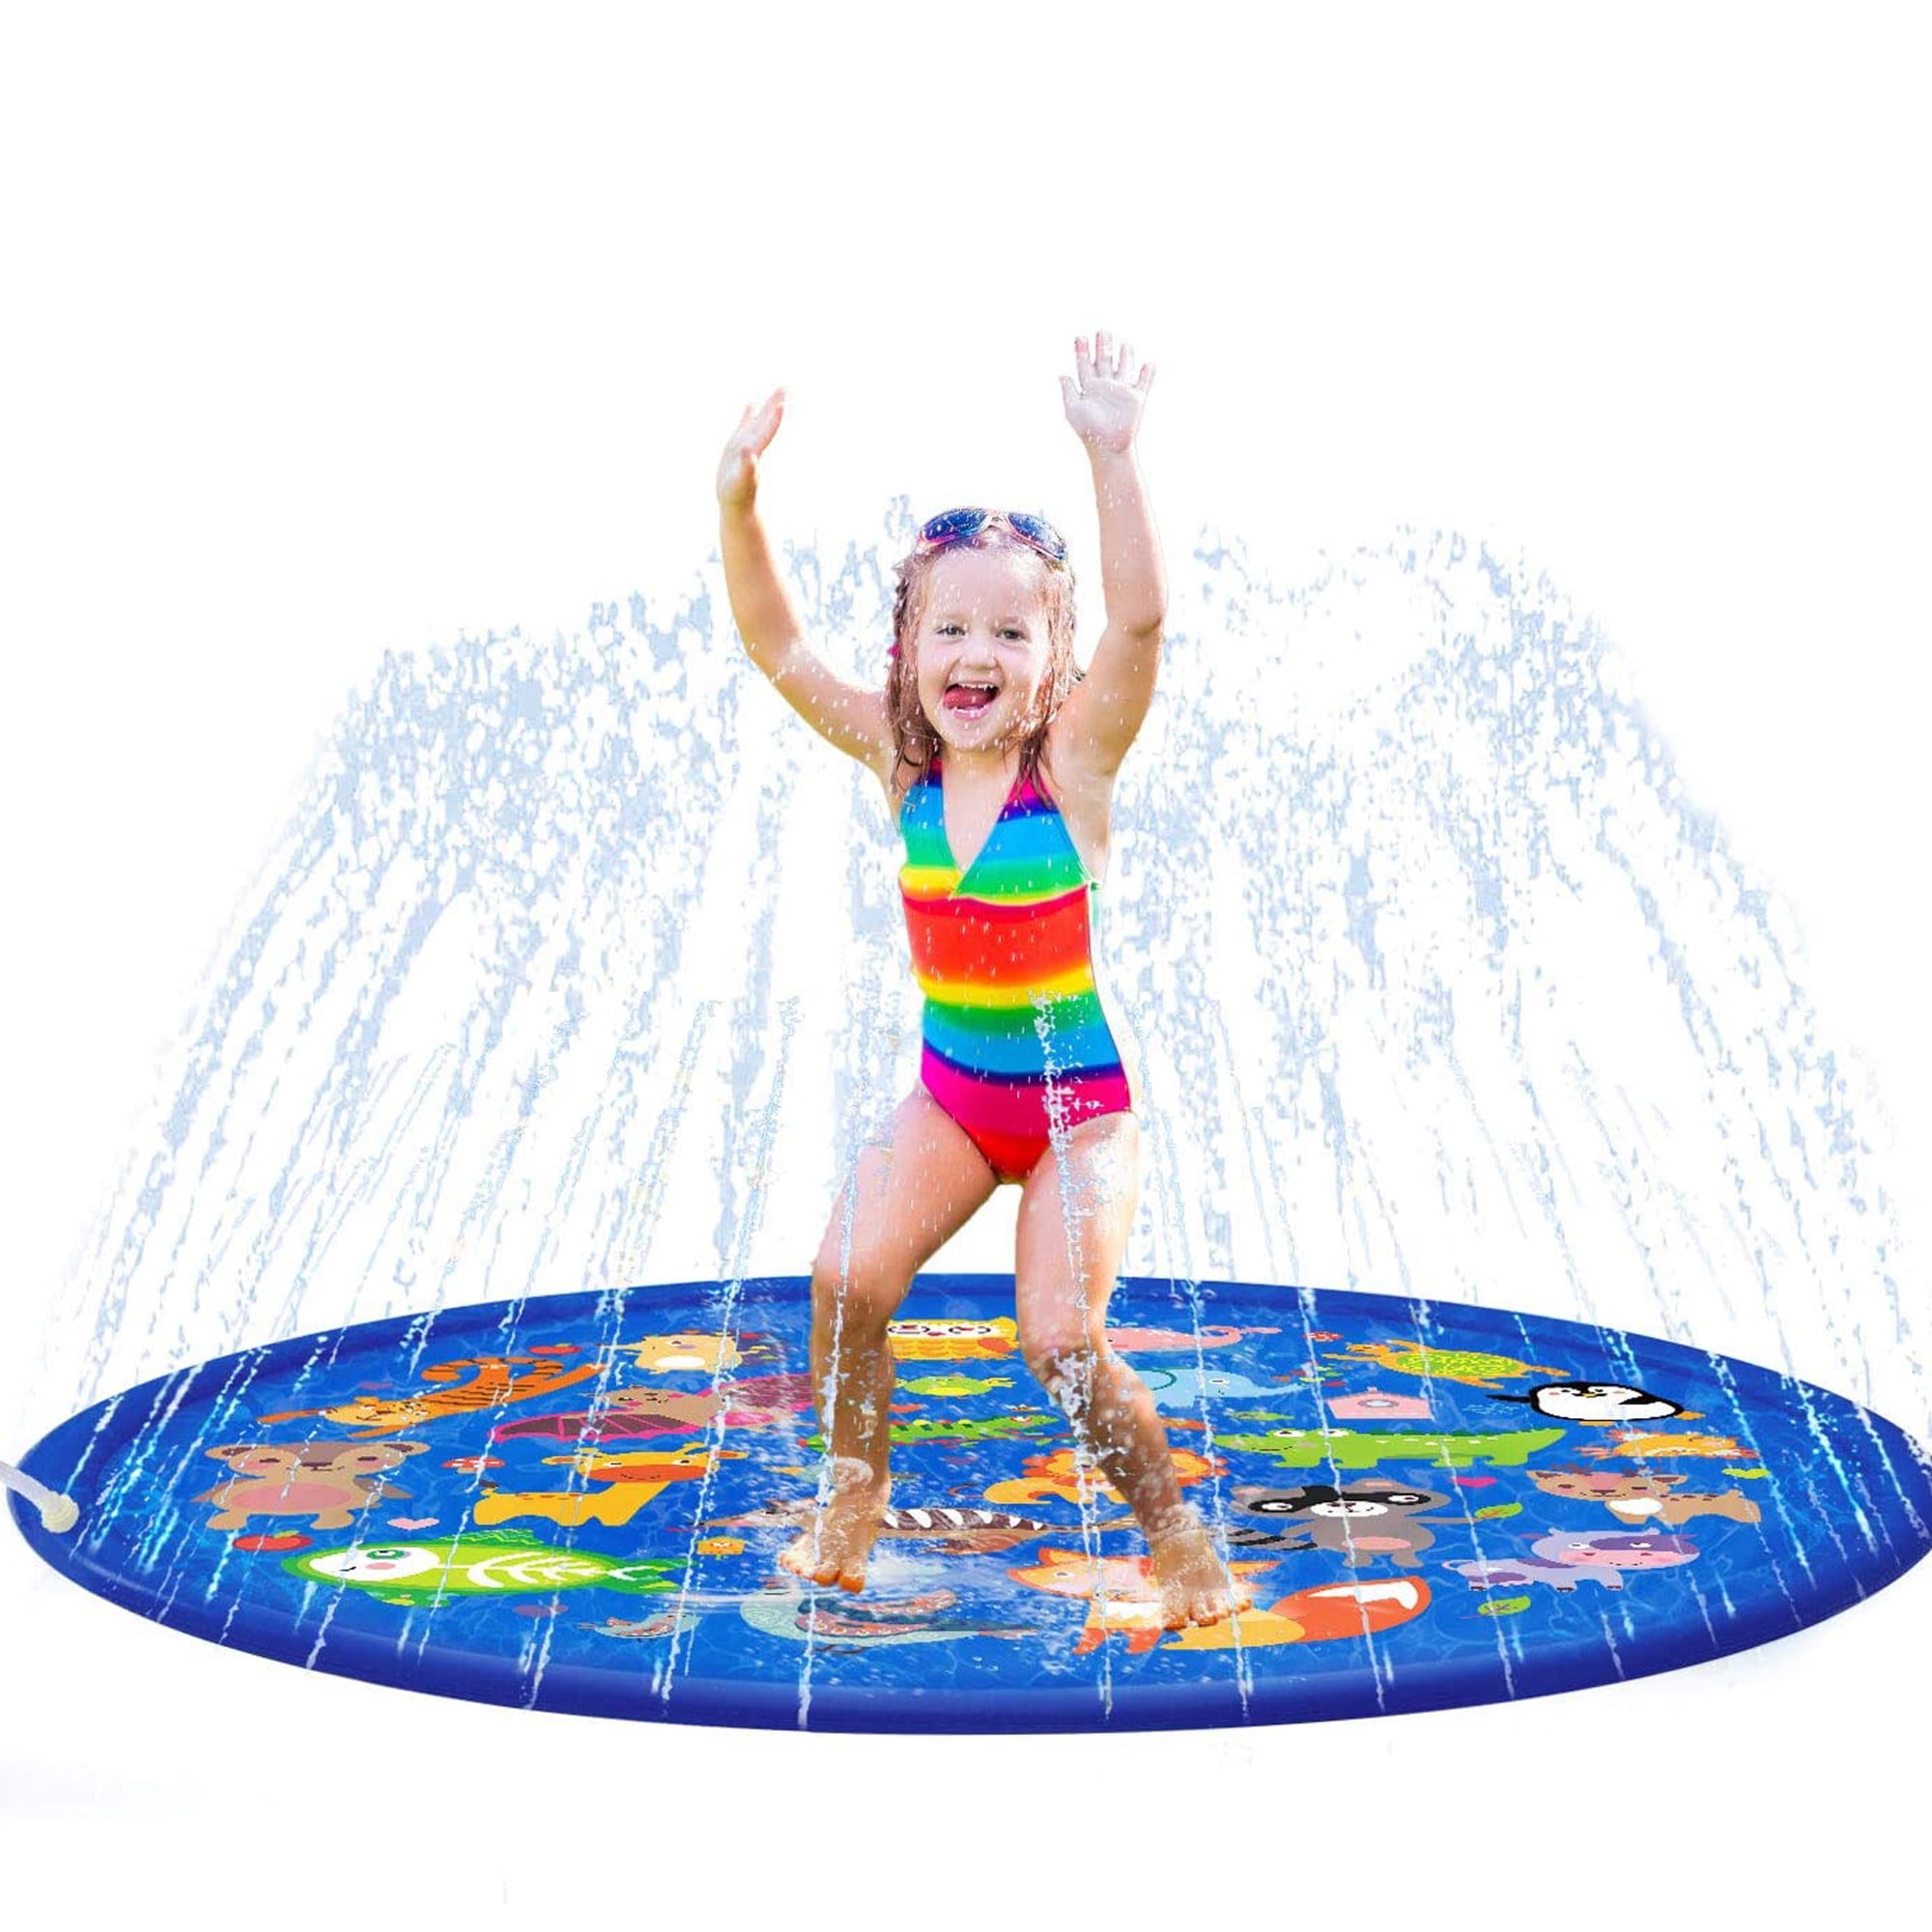 Fun Little Toys Inflatable Splash Sprinkler Pad for Kids Toddlers Dogs